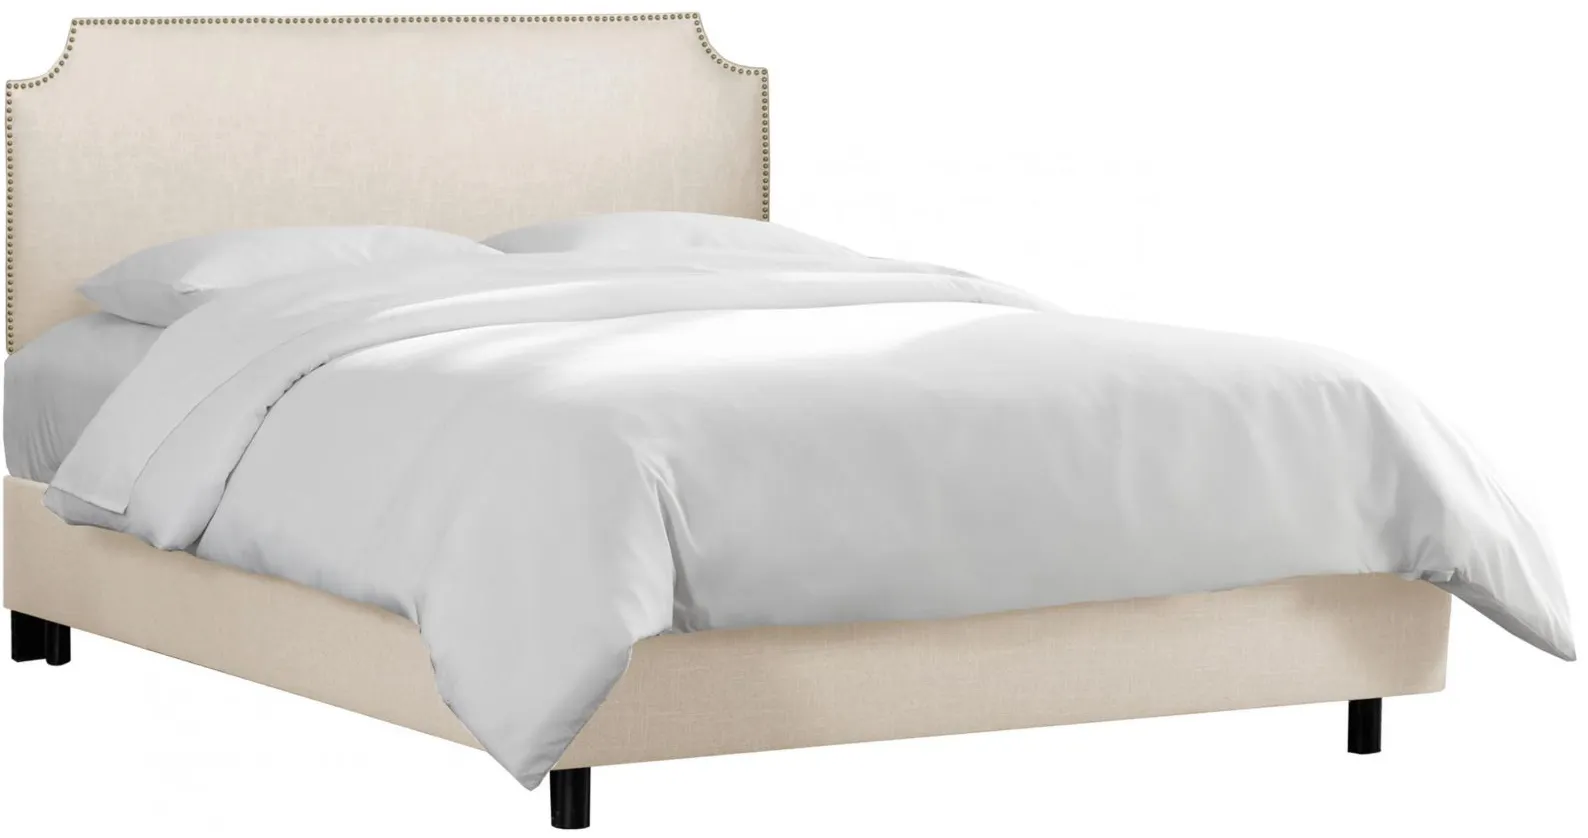 McGee Bed in Linen Talc by Skyline